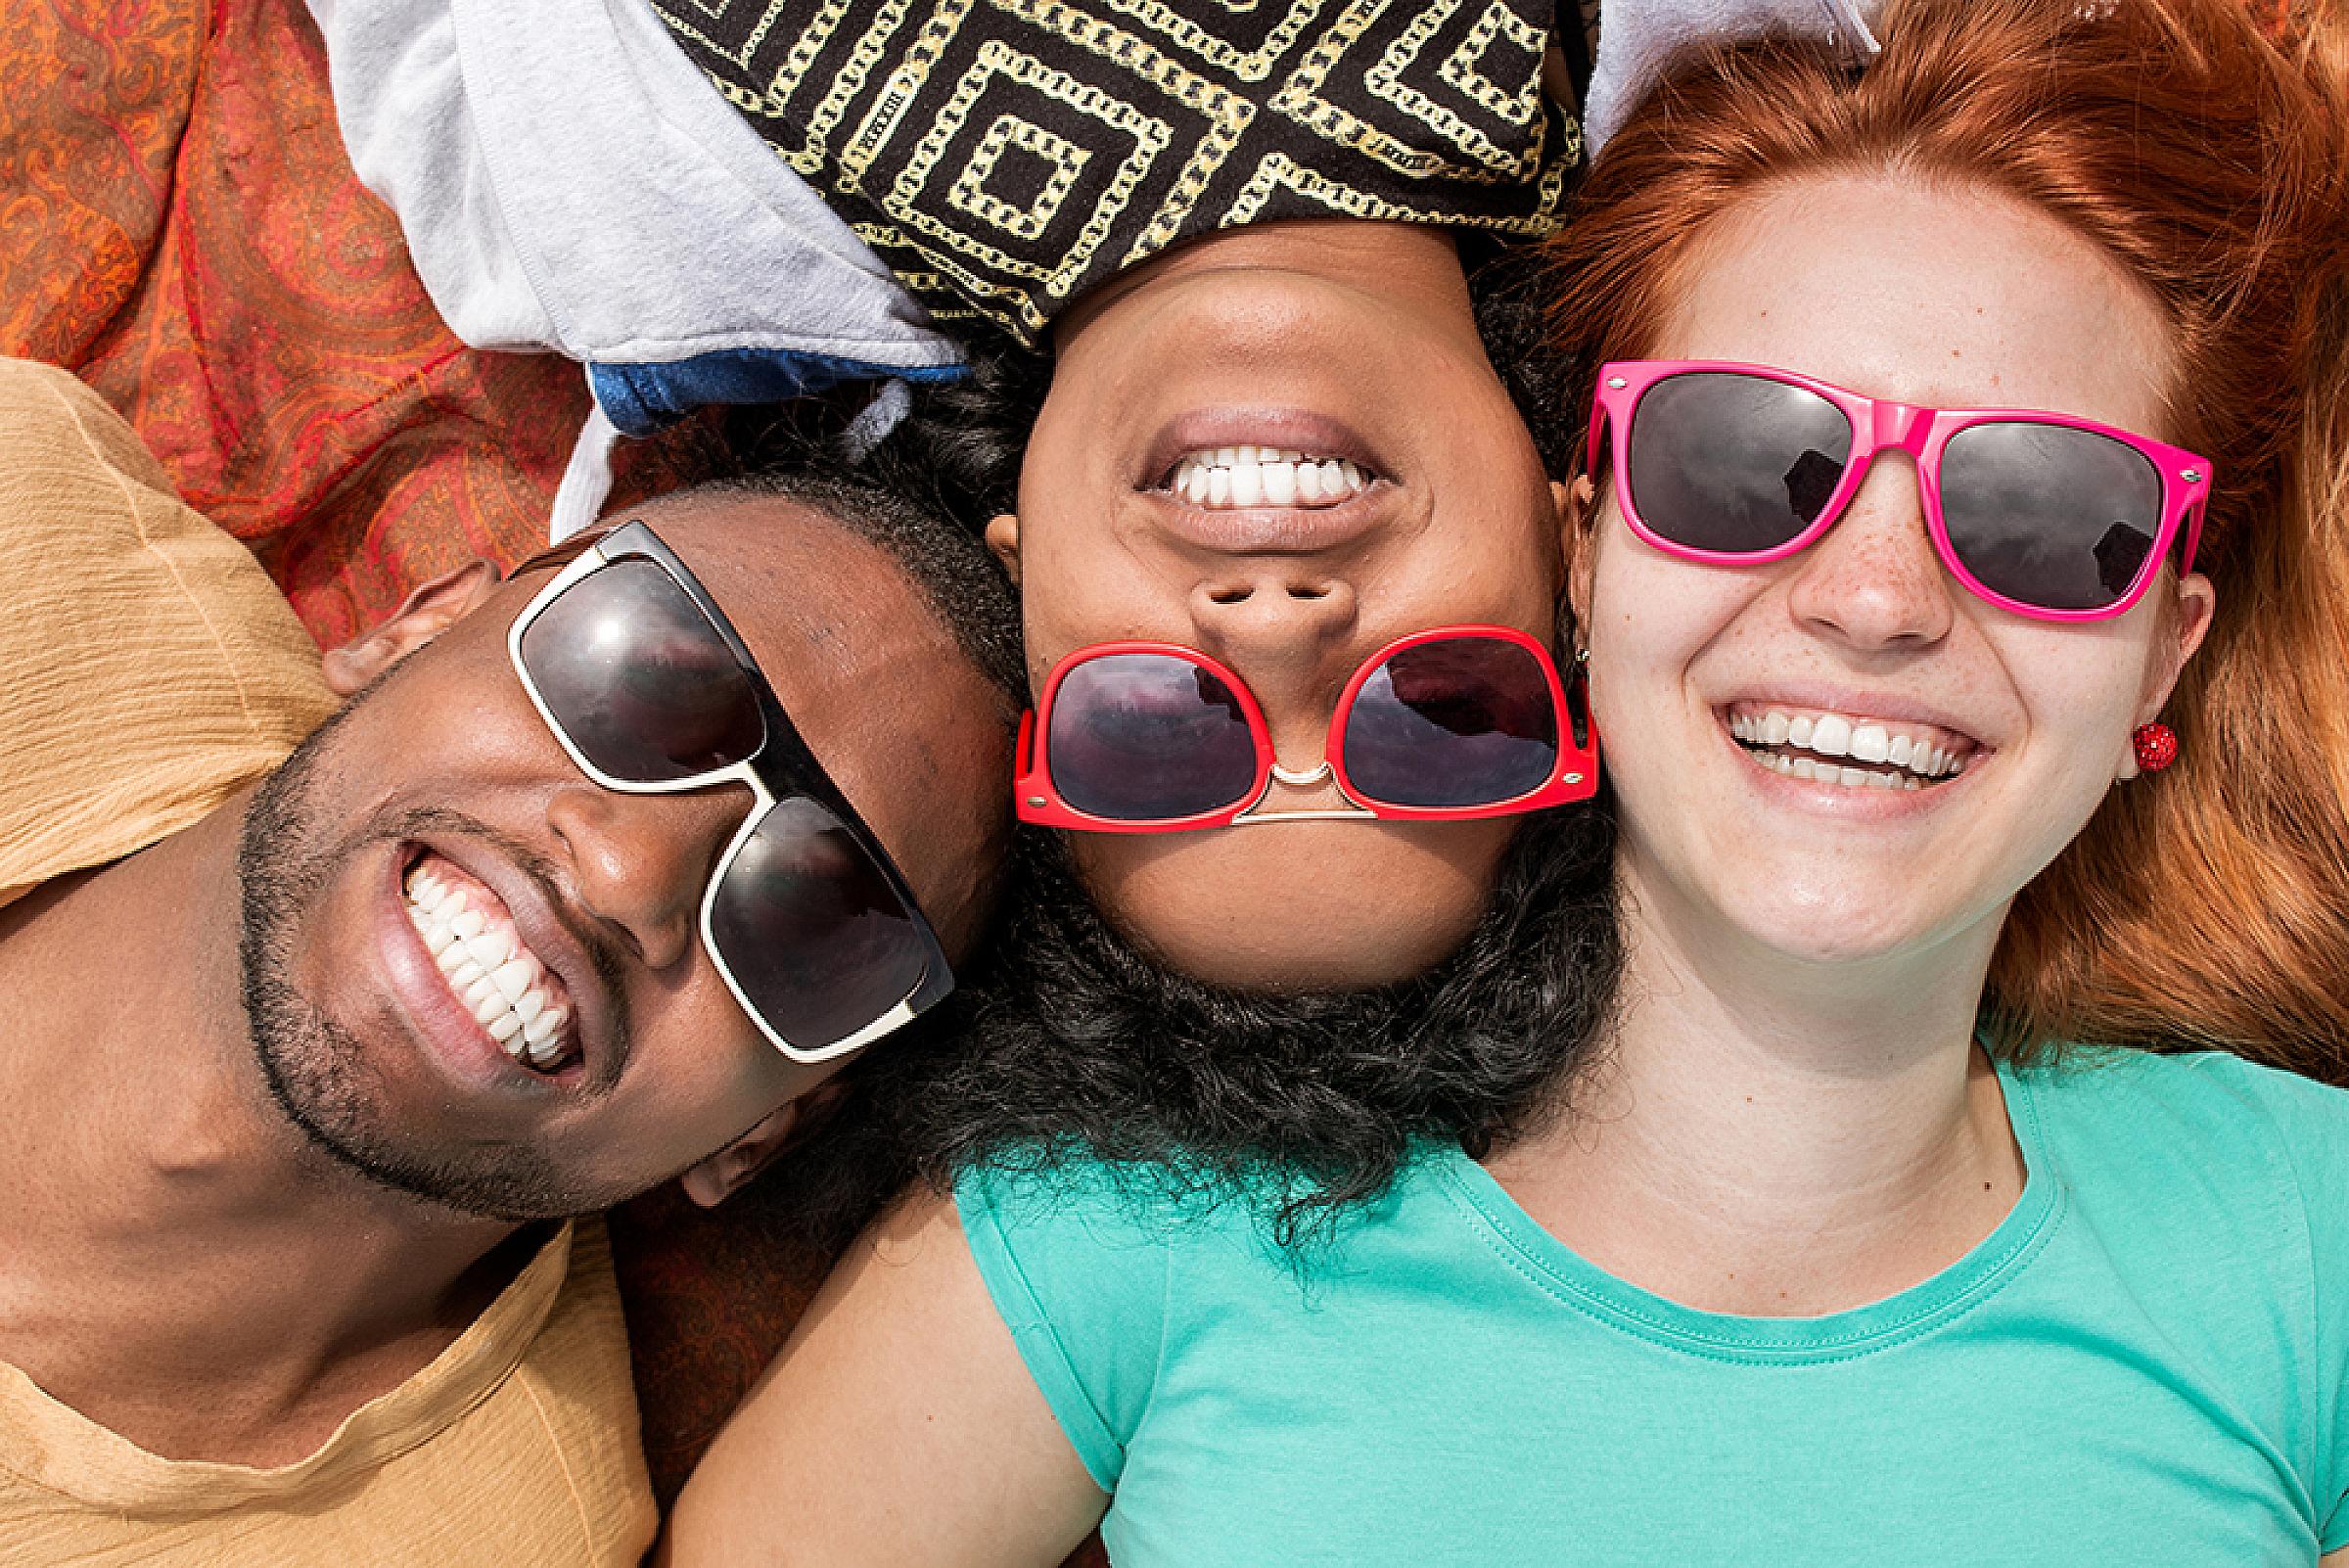 Three people lying on the ground and smiling while wearing sunglasses